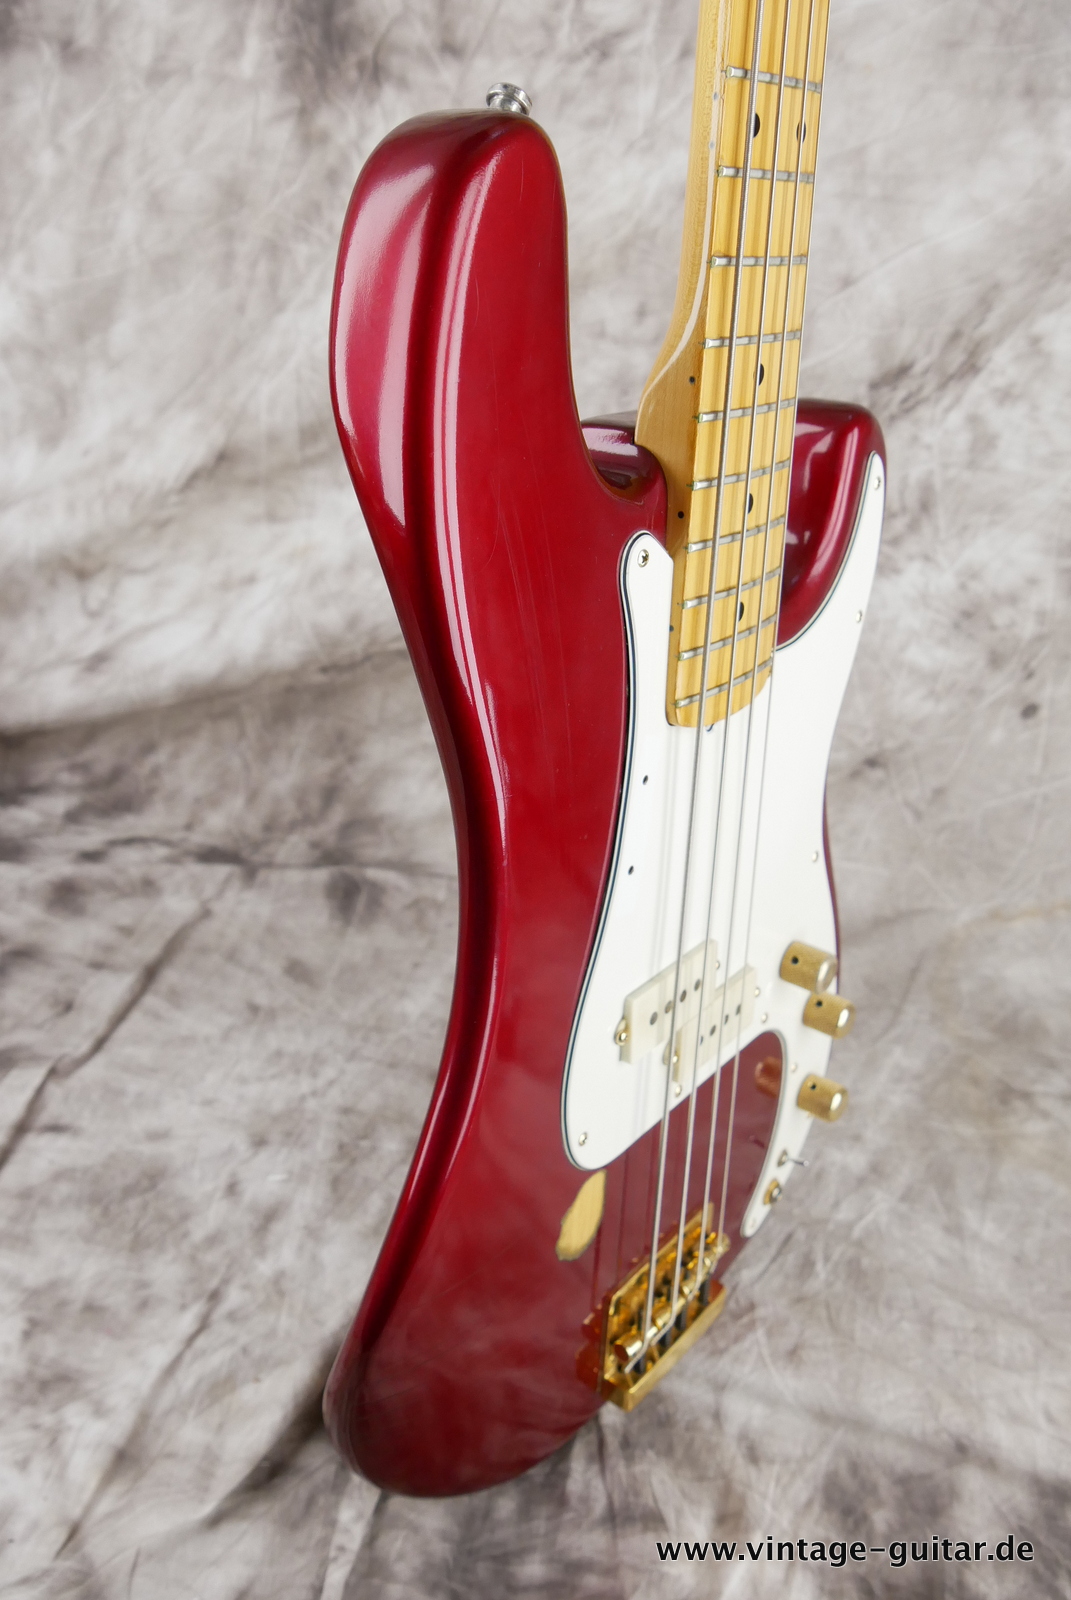 Fender_Precision_Special_USA_candy_apple_red_1982-005.JPG